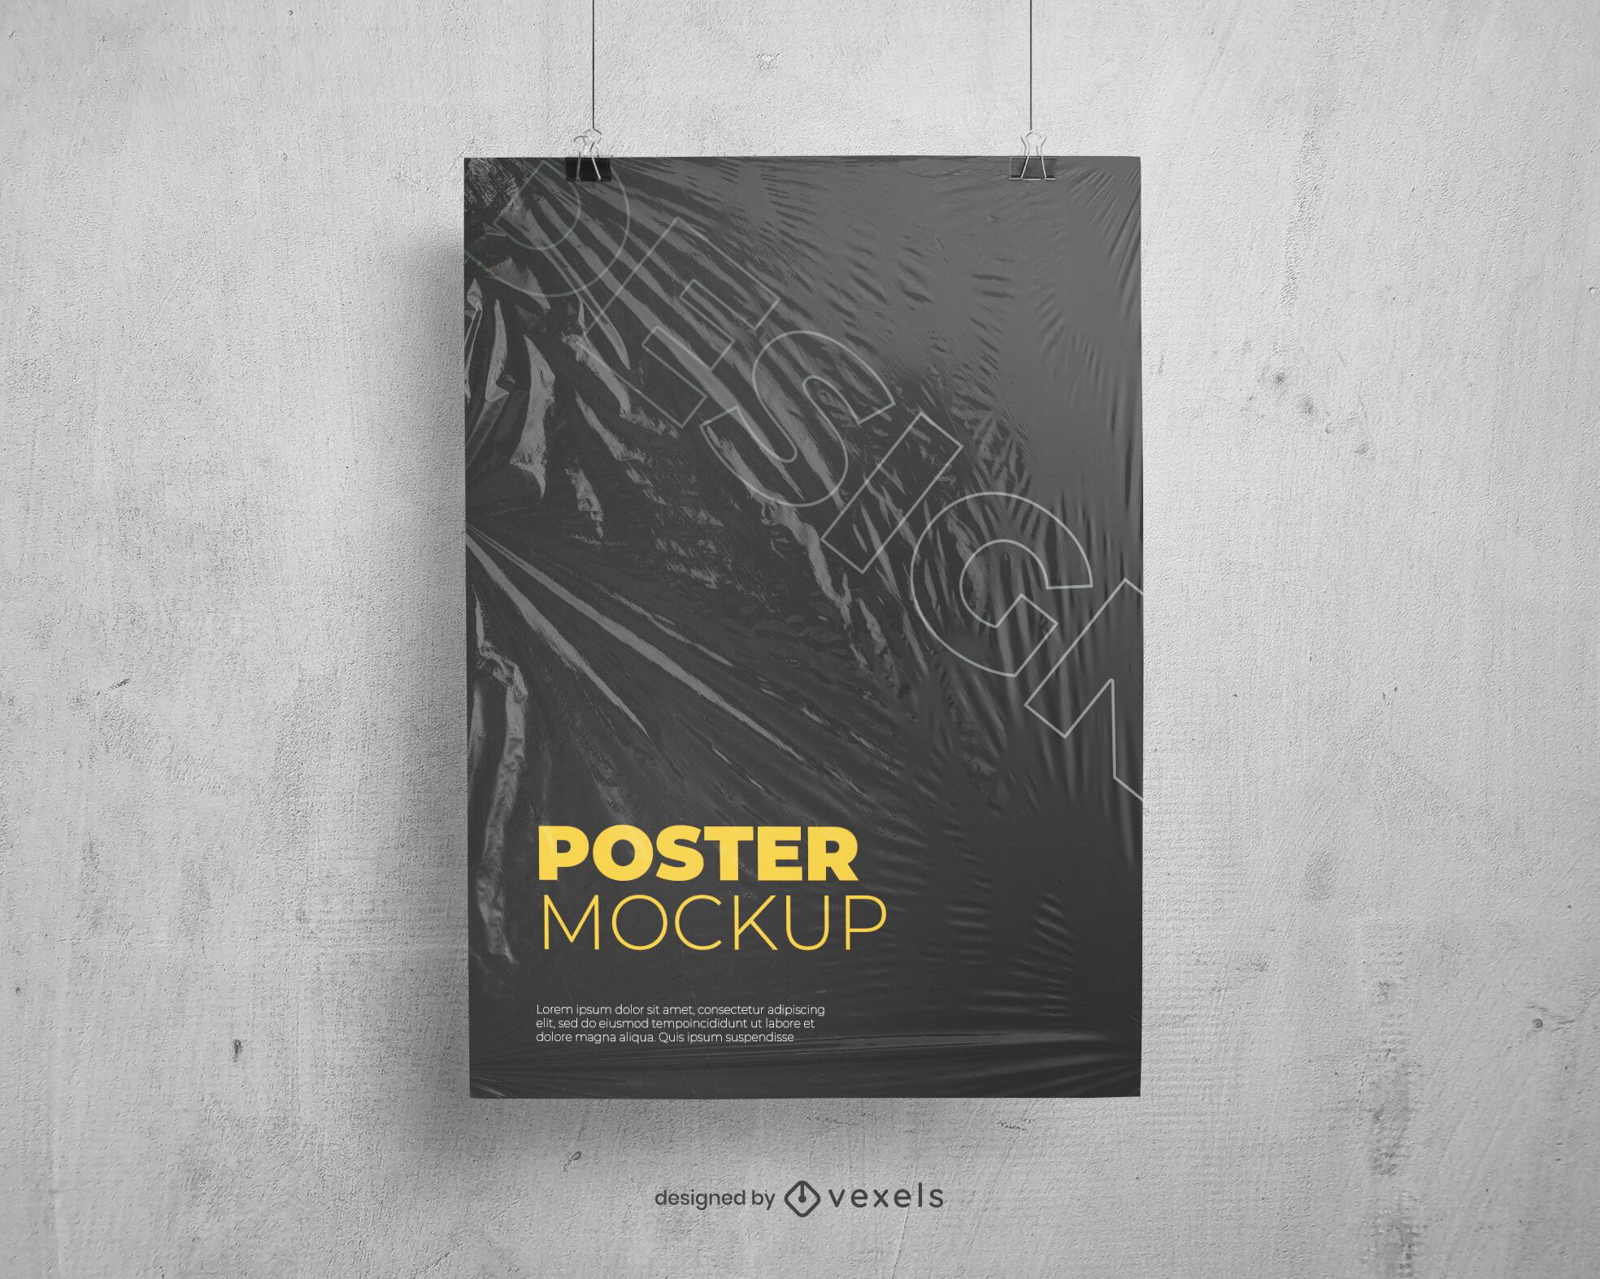 A3 Poster Mock-Up - Man in a denim shirt holding a poster on a